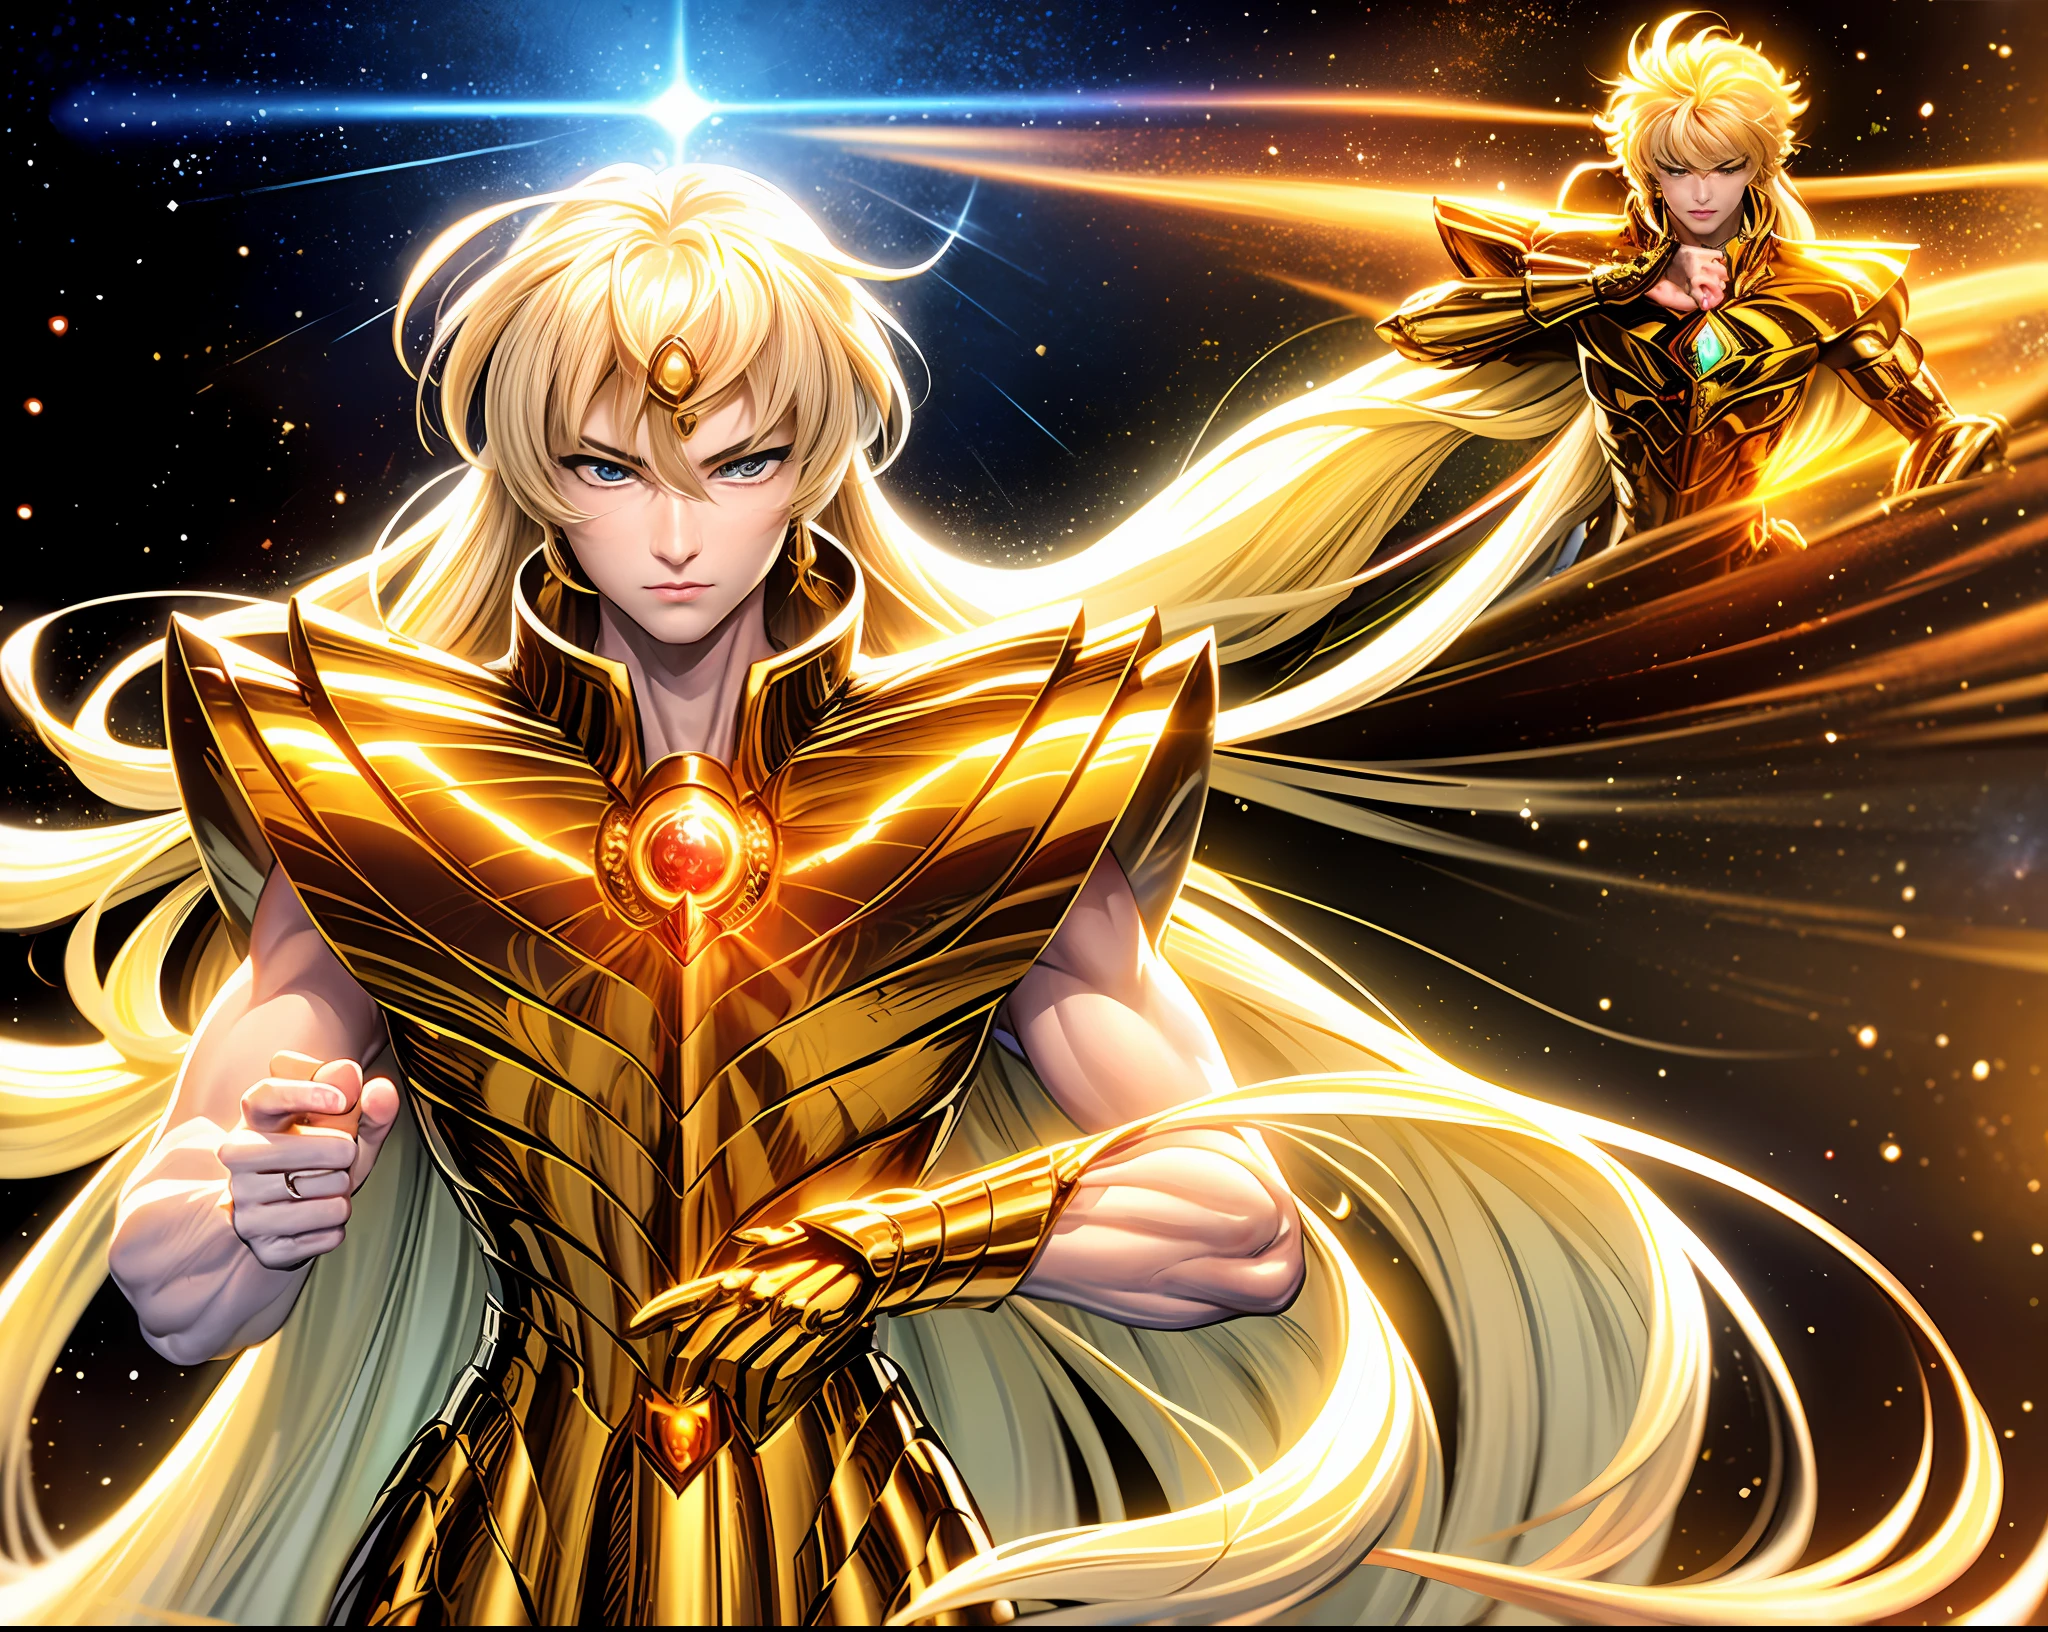 jim lee, ((1man)), (masterpiece, 16K, Alex Ross style, less cartoony anatomy:1.3), (Shaka of Virgo from Saint Seiya:1.2), (wearing the resplendent Gold Cloth:1.2), (a robust and powerful physique:1.2), (capturing his masculine features with utmost beauty:1.2), (Canon EOS R5 camera, renowned for its high-resolution capabilities:1.2), (paired with a Canon RF 85mm f/1.2L USM lens, perfect for capturing stunning portraits:1.2), (the image showcasing Shaka's luscious golden hair and radiant blue eyes:1.2), (his stoic expression displaying a sense of wisdom and power:1.1), (the intricate details of the Gold Cloth armor meticulously illustrated:1.3), (the portrayal in the Alex Ross style, combining the best of comic art and realism:1.1), (a work of art that transcends the boundaries between manga and hyper-realism:1.1), (the richness of the 16K resolution capturing every minute detail:1.3), (the background featuring a celestial and ethereal ambiance, adding to the mystical aura:1.2), (the image a visual masterpiece, showcasing the magnificence of Shaka of Virgo in all his glory:1.1).